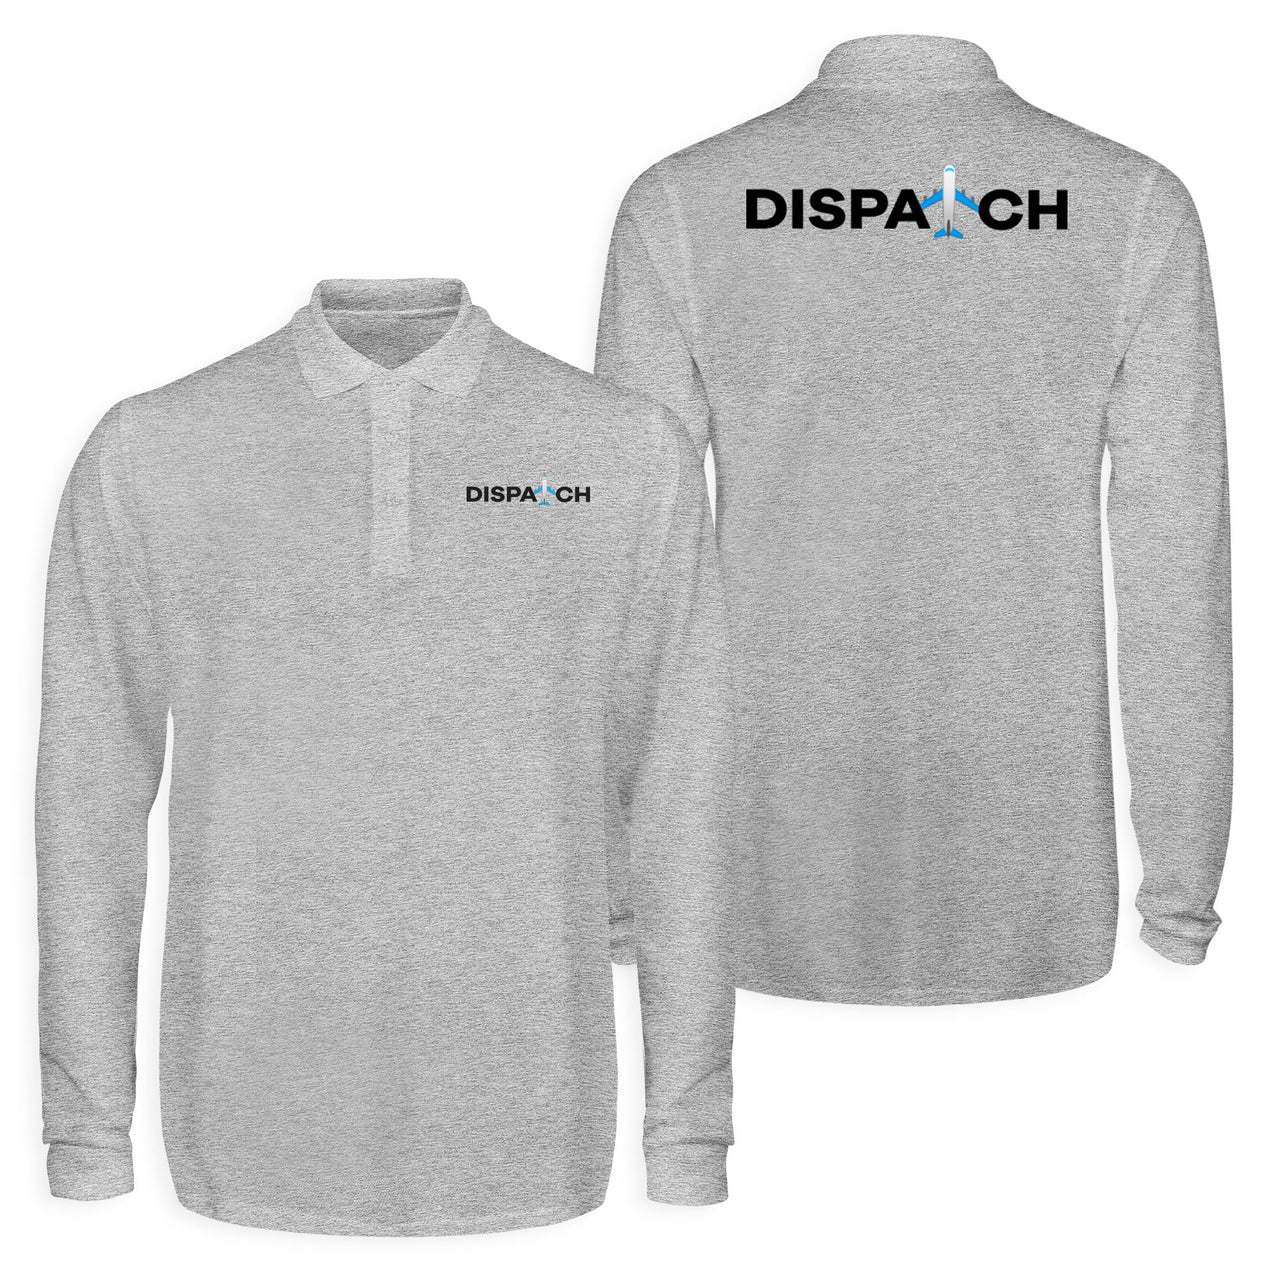 Dispatch Designed Long Sleeve Polo T-Shirts (Double-Side)